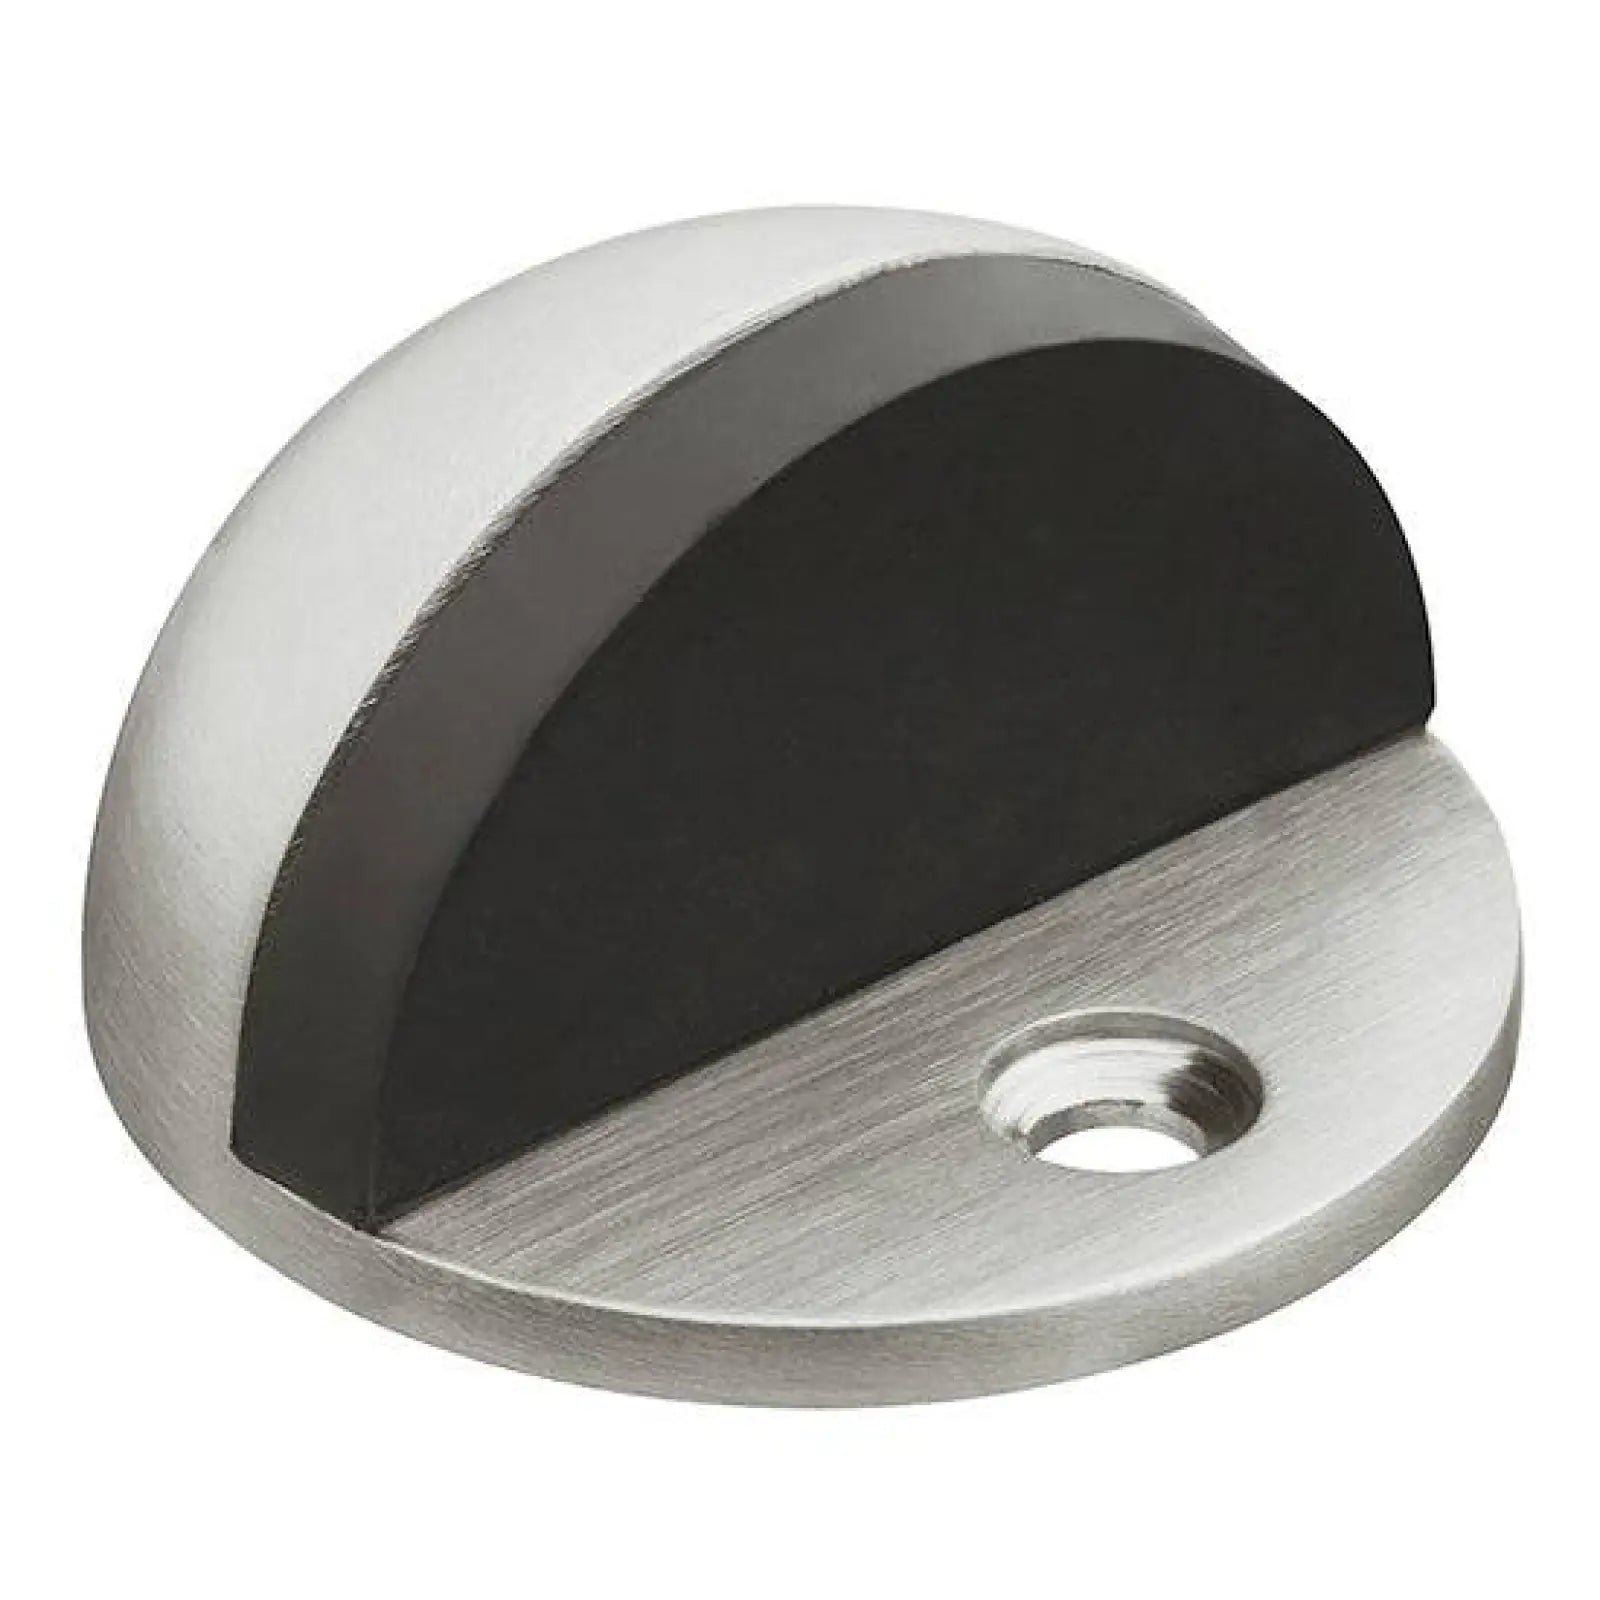 Oval Floor Mounted Door Stop Wall Protector - Decor And Decor